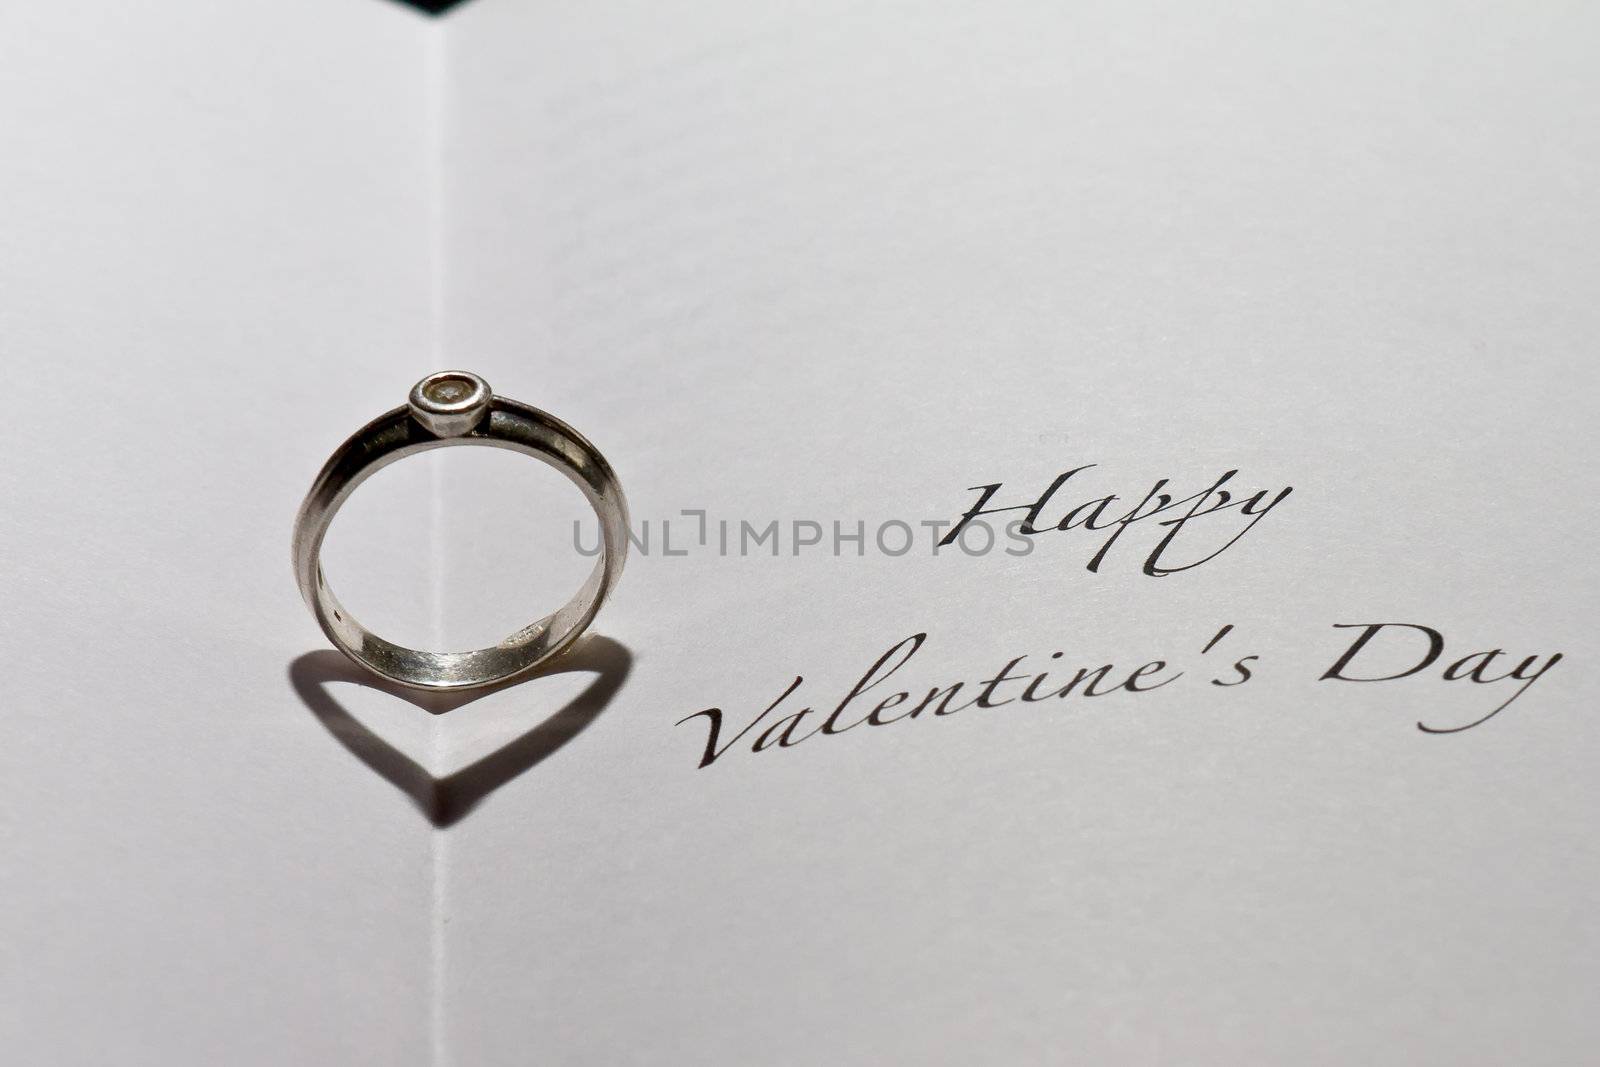 Ring casting heart shadow in book with the sentence "Happy Valentine's Day"